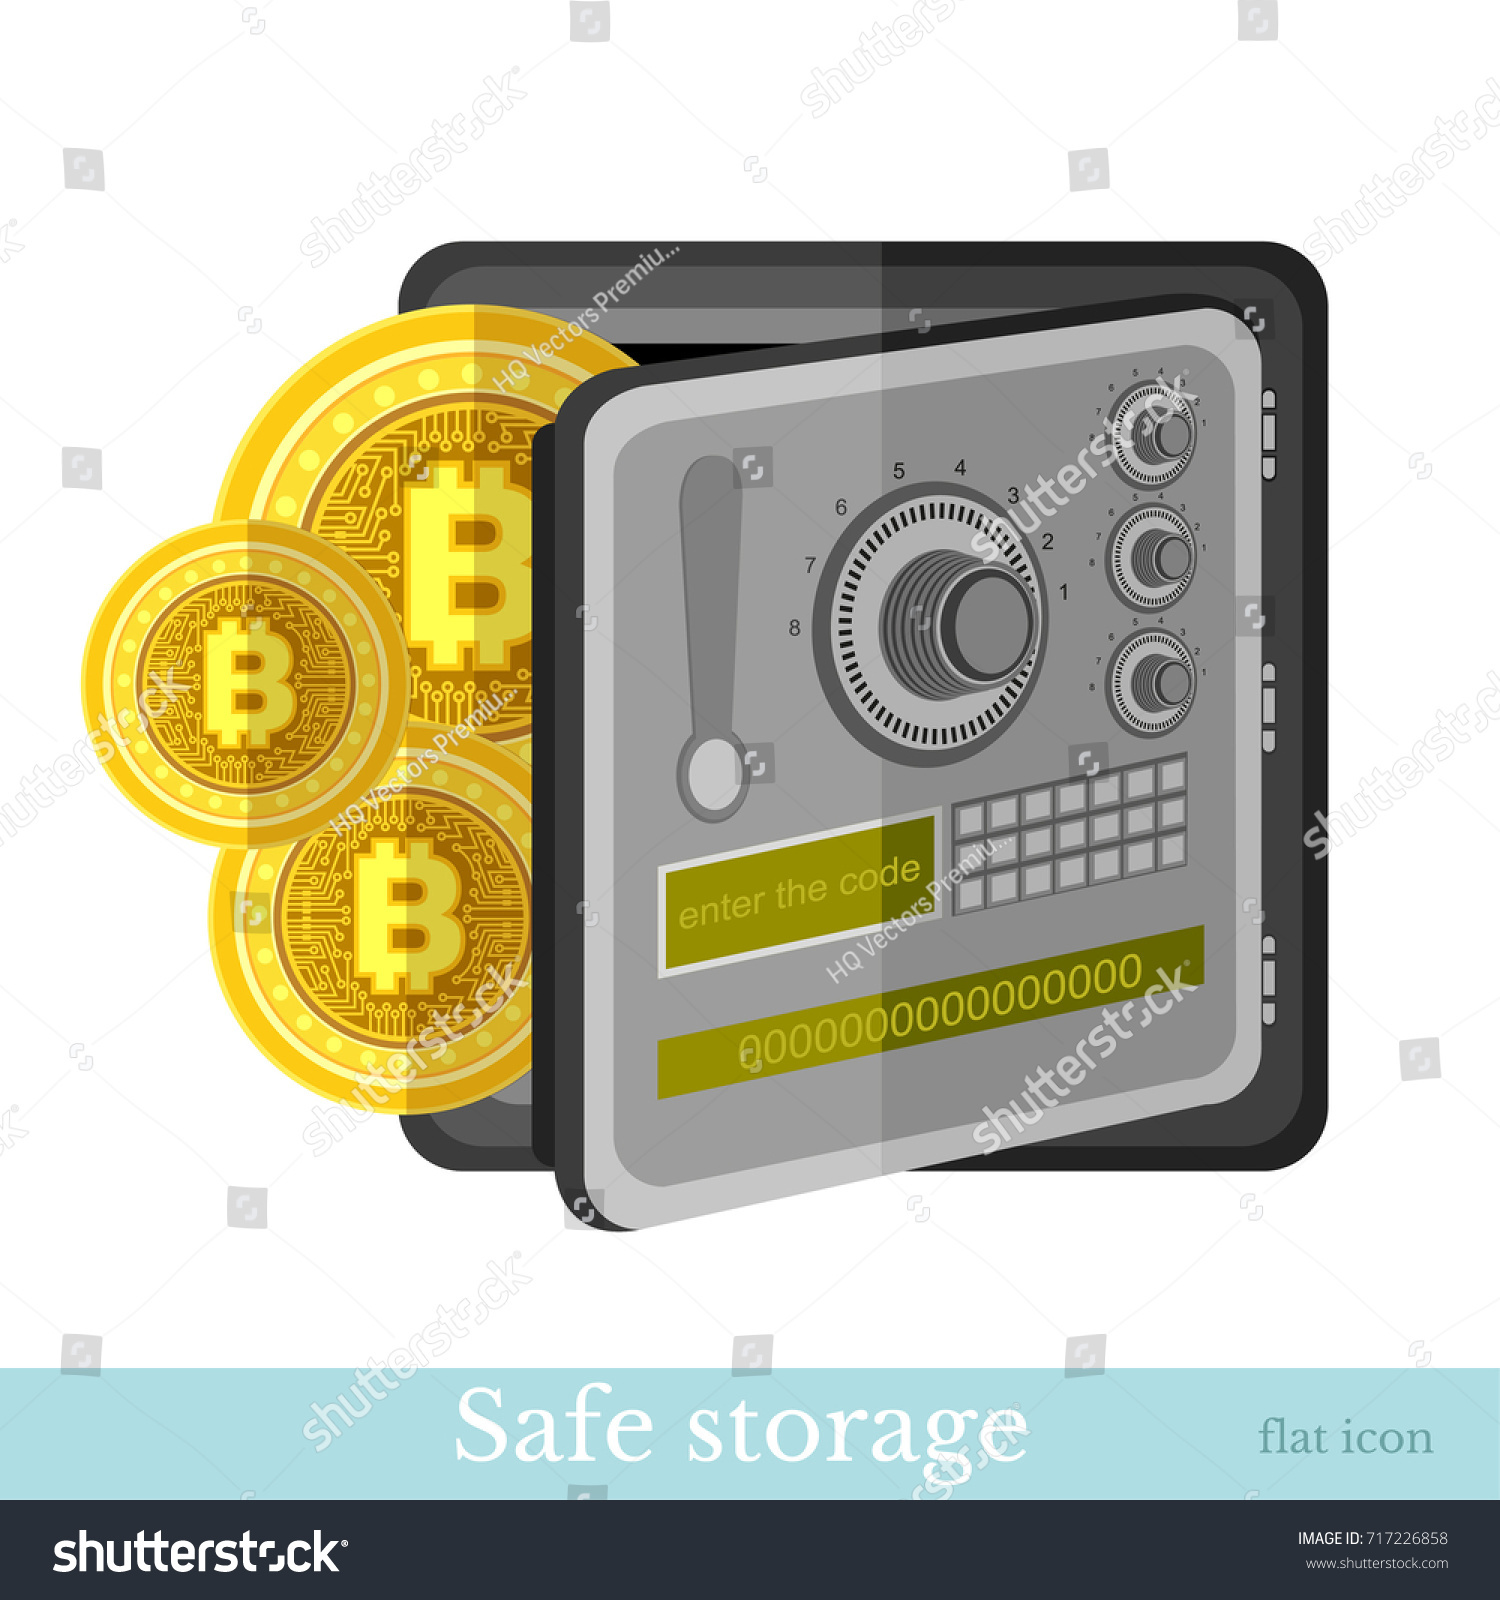 SVG of Flat icon bit coins with safe. Mining bit coin business illustration isolated on white svg